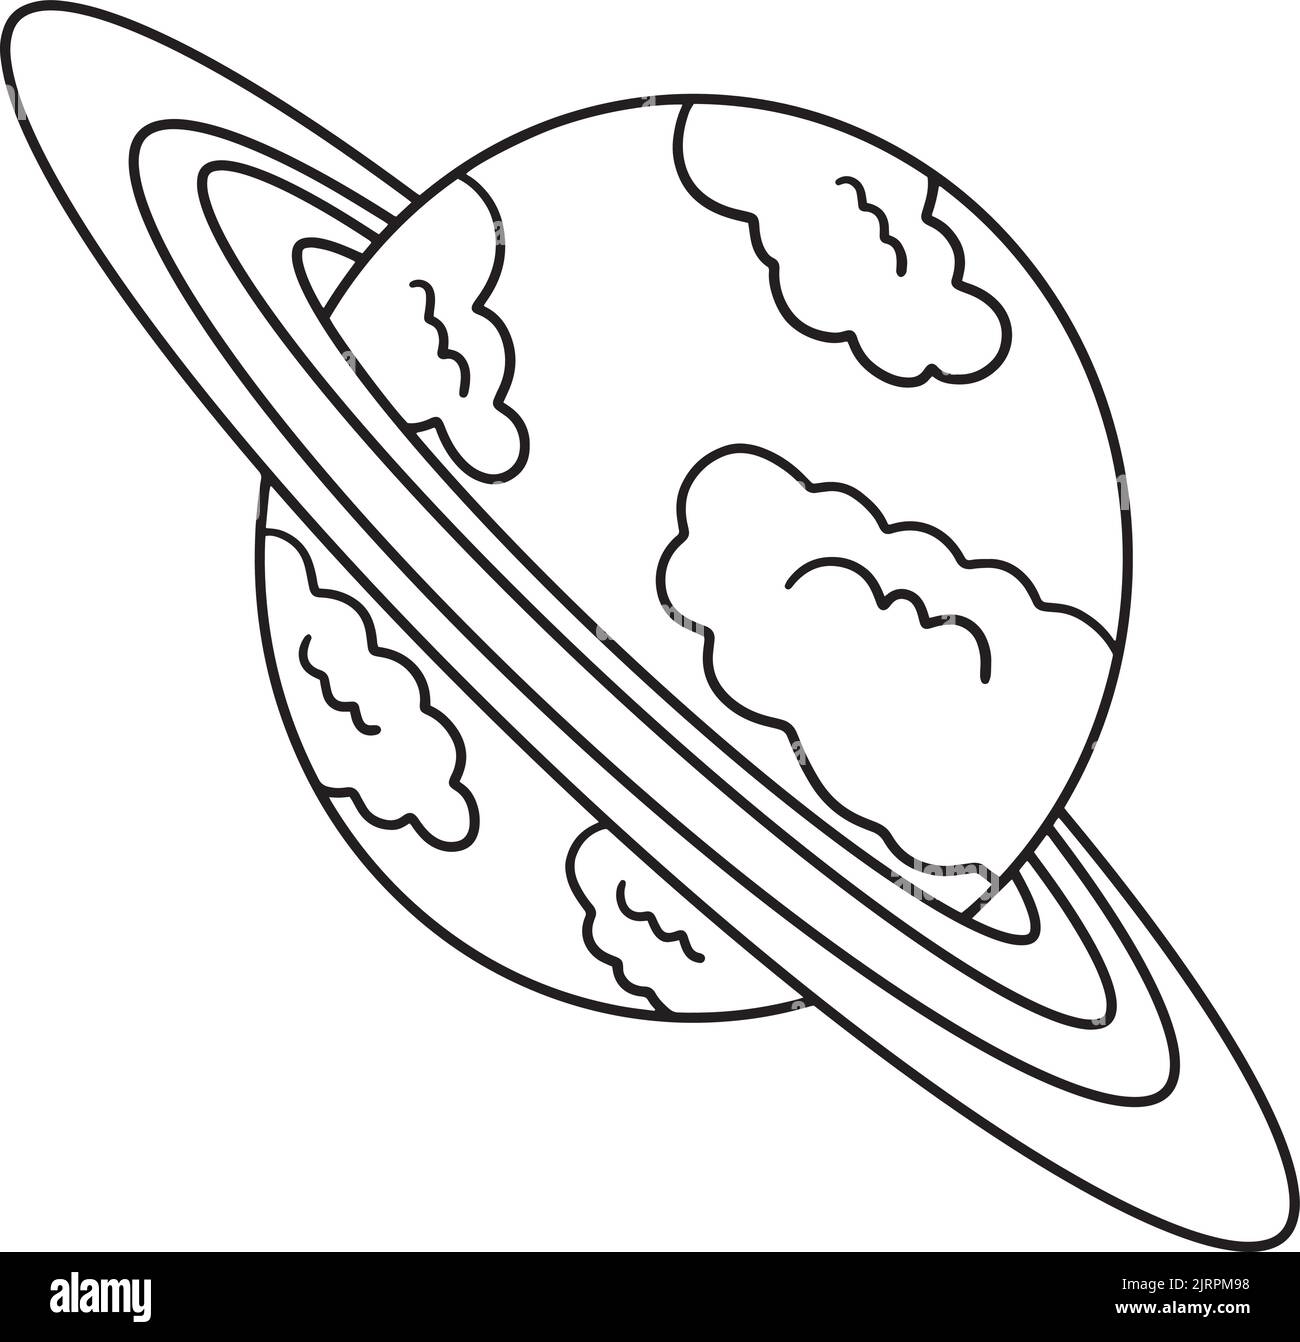 Planet Saturn Isolated Coloring Page für Kinder Stock Vektor